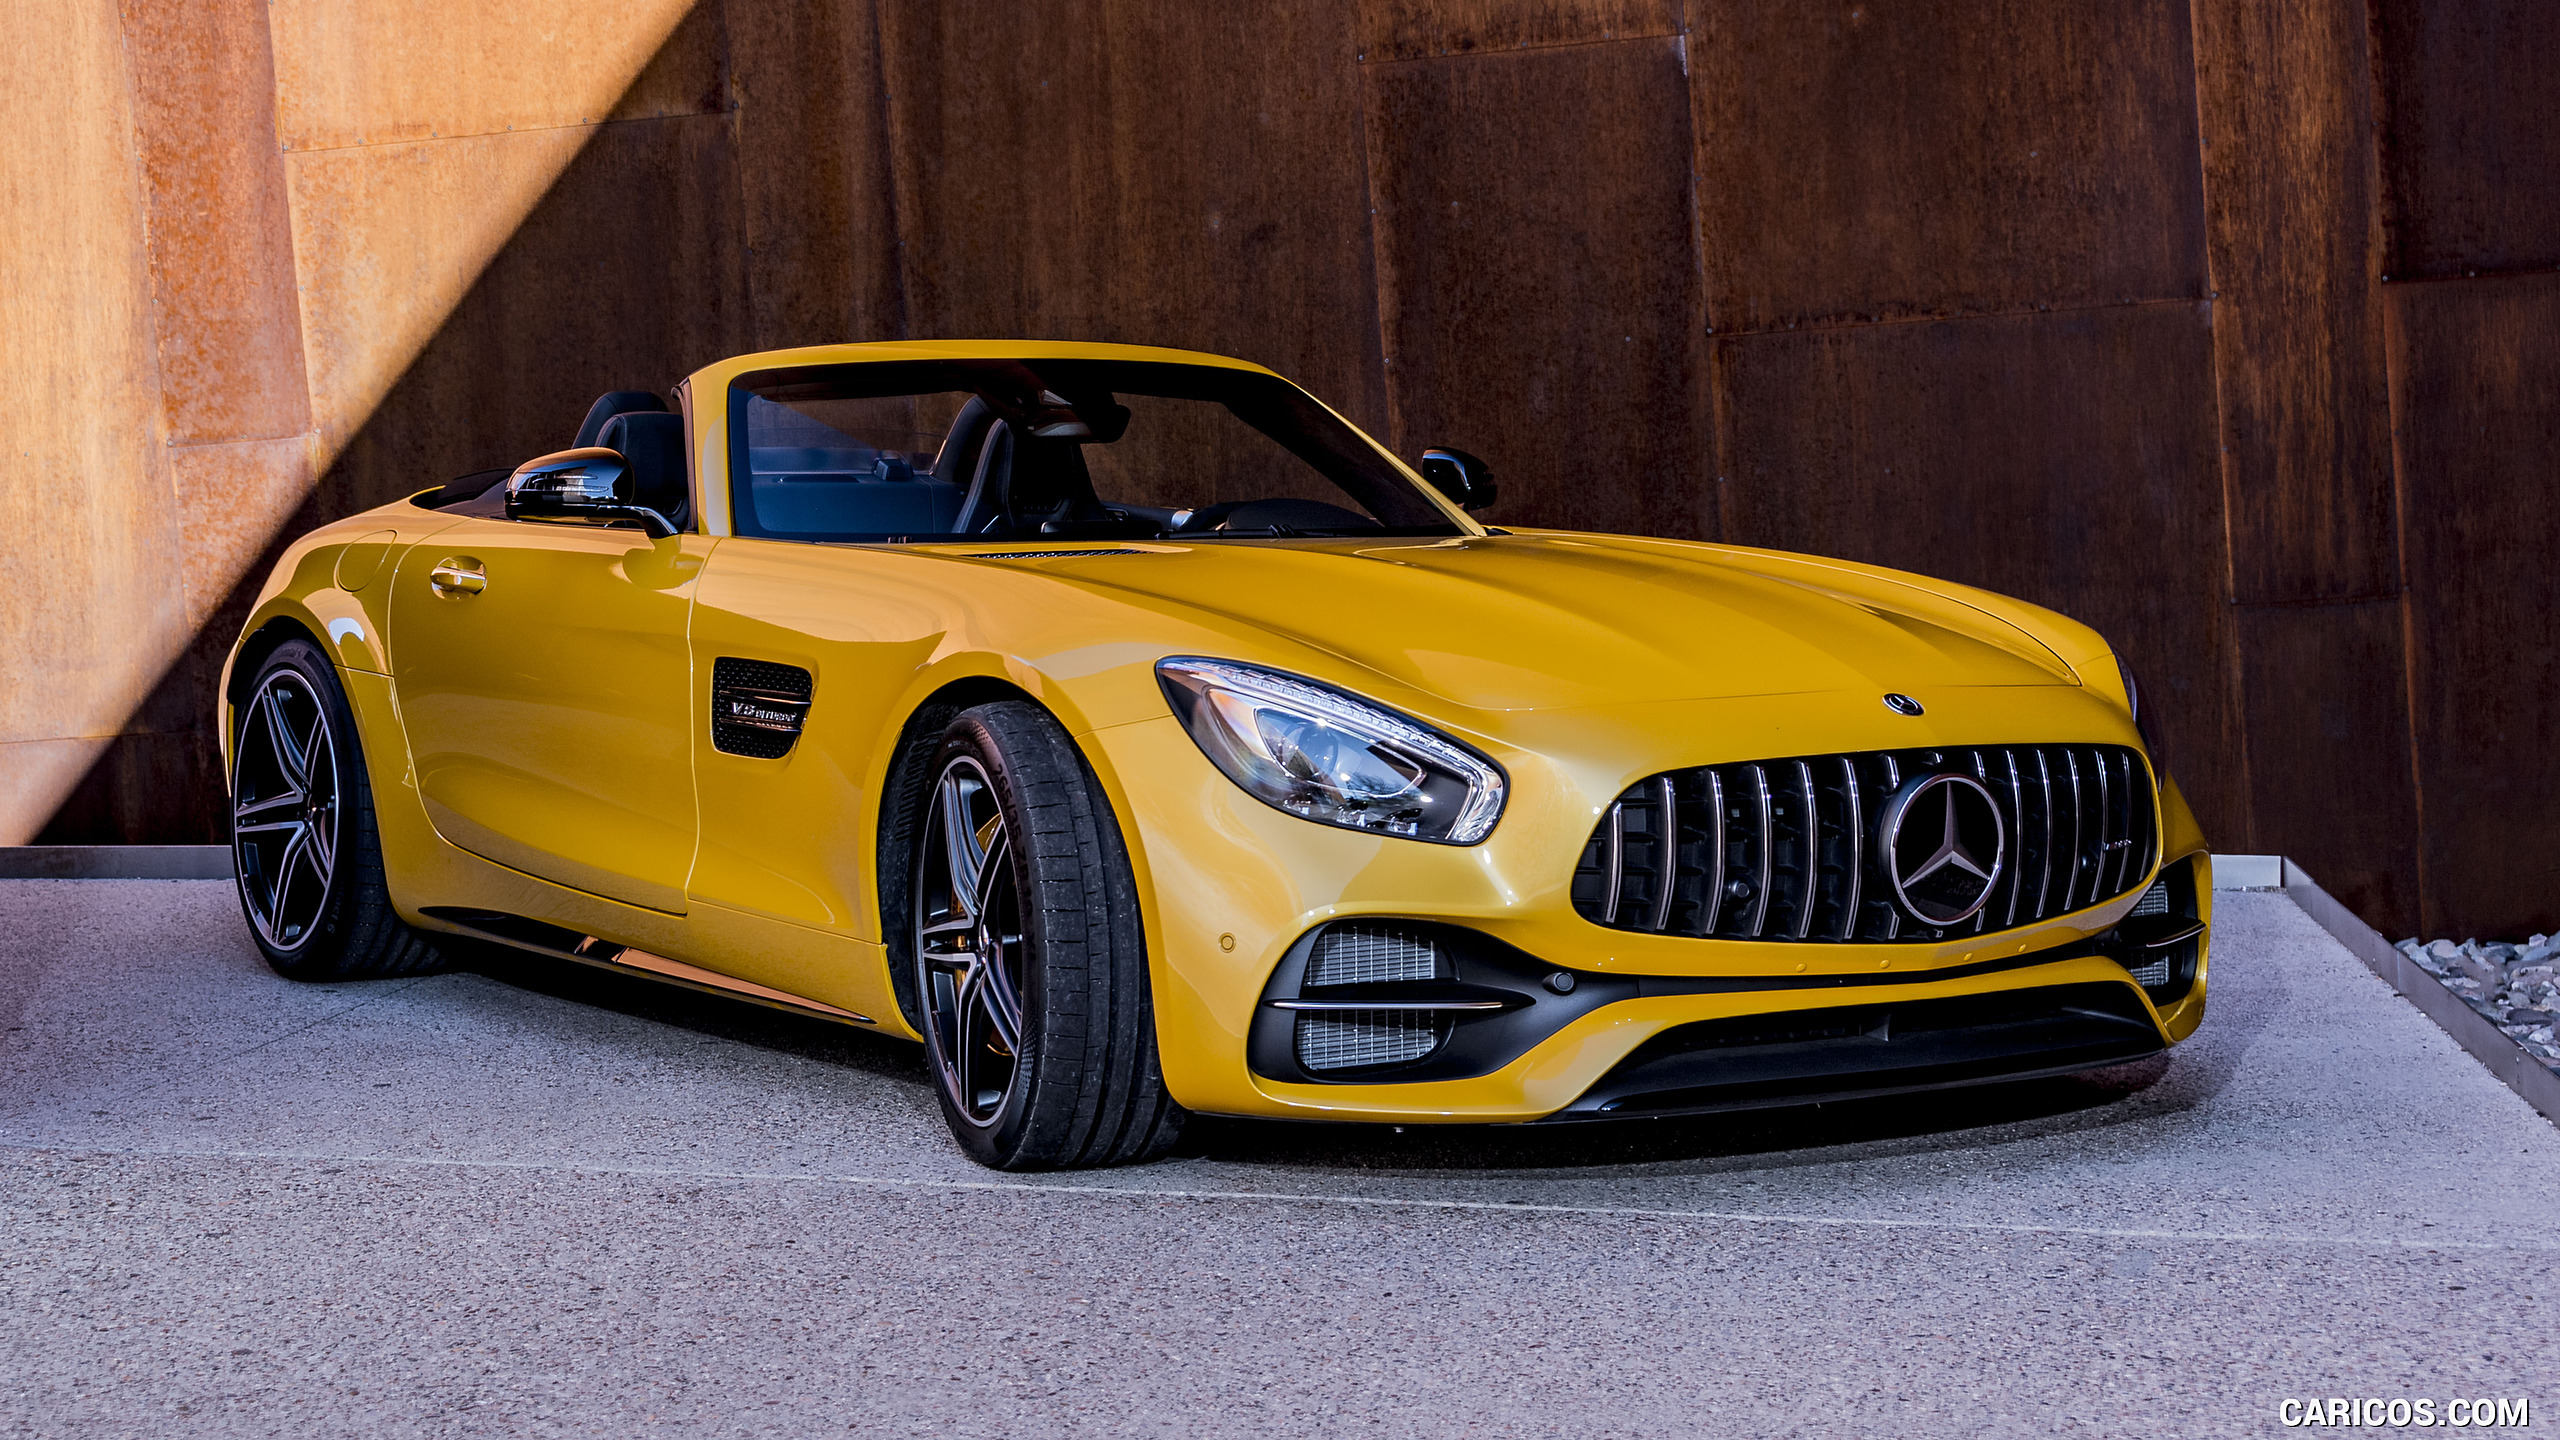 2018 Mercedes-AMG GT C Roadster - Front Three-Quarter, #250 of 350